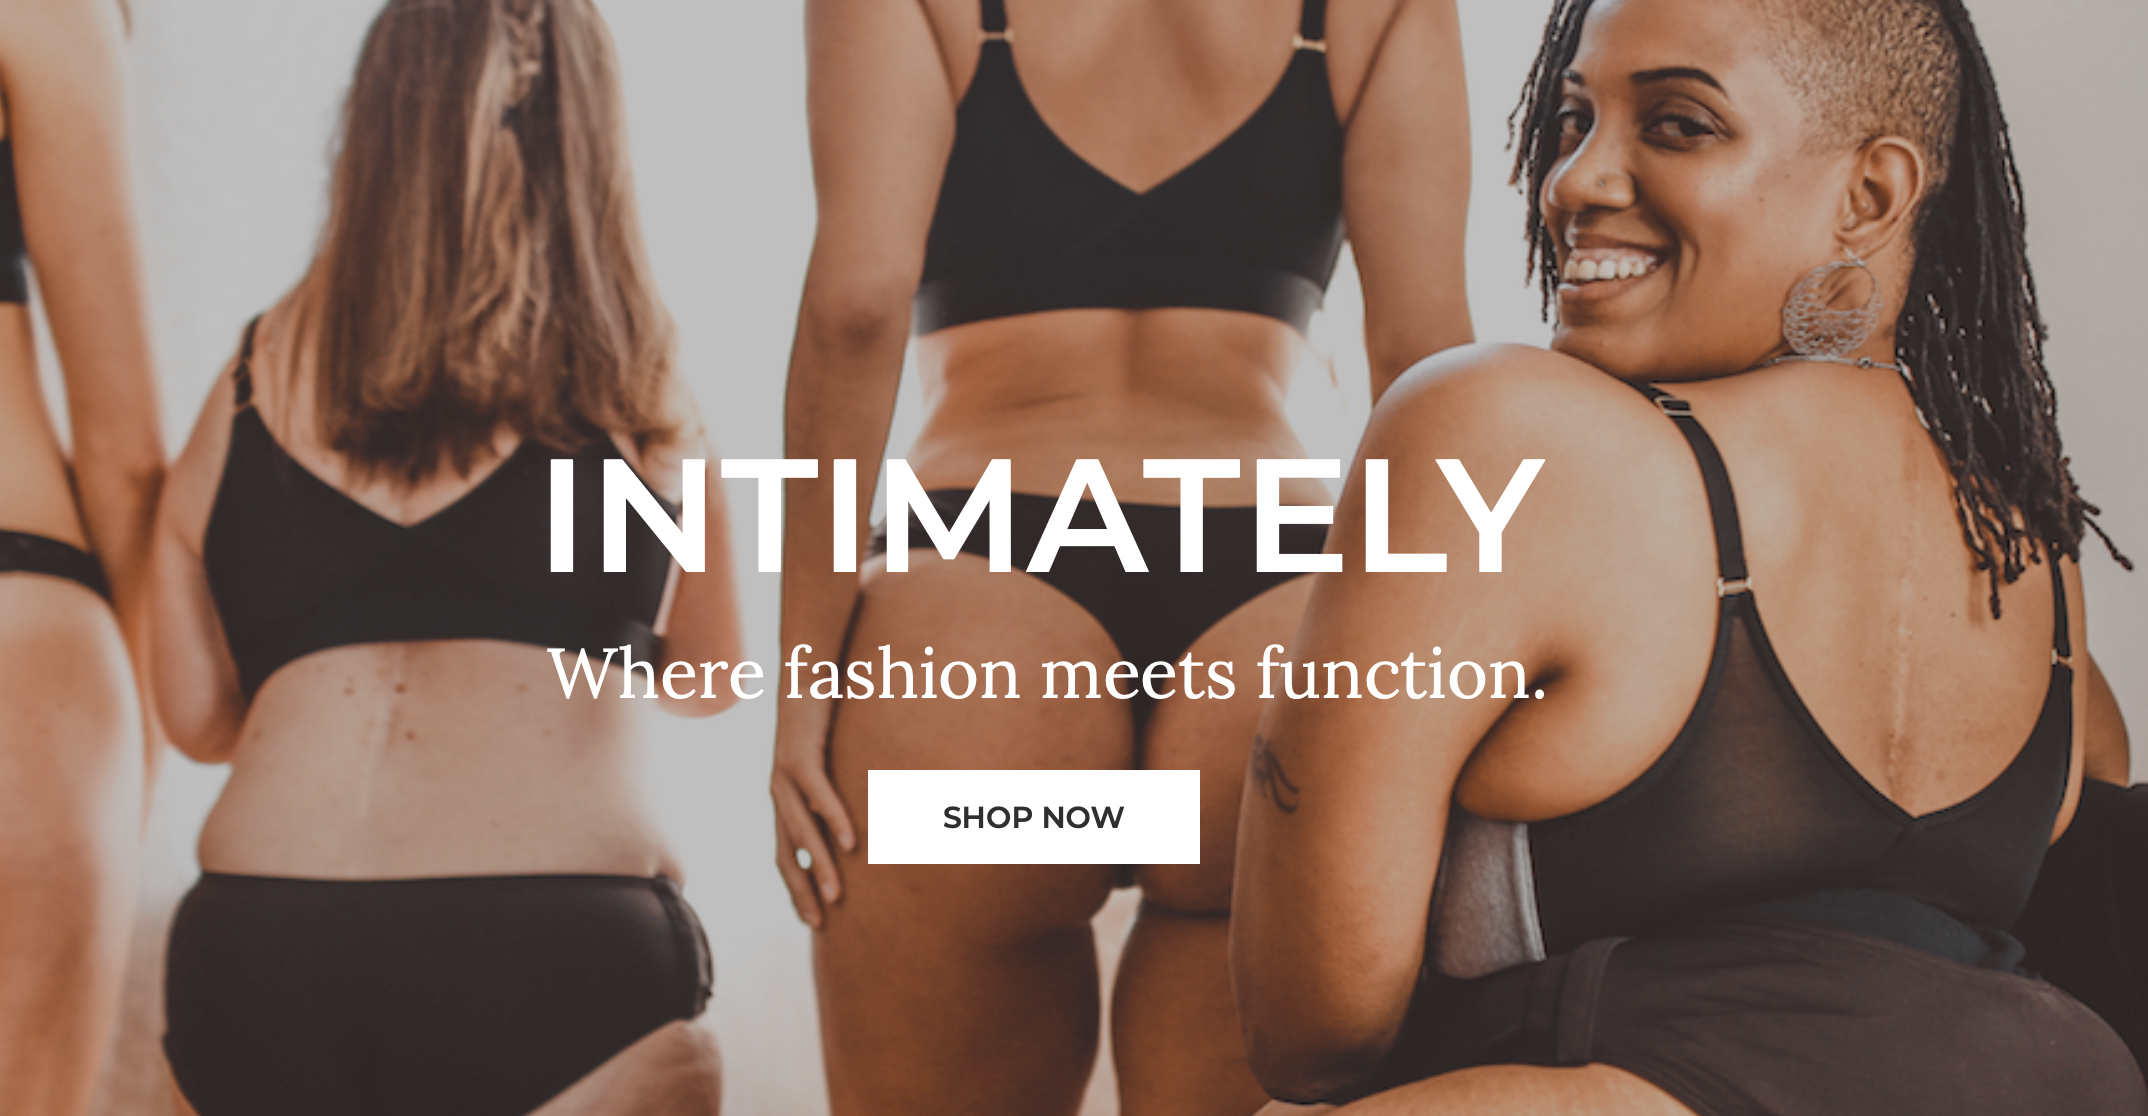 Liberare Is The Adaptive Underwear Brand Making Waves In The Fashion  Industry